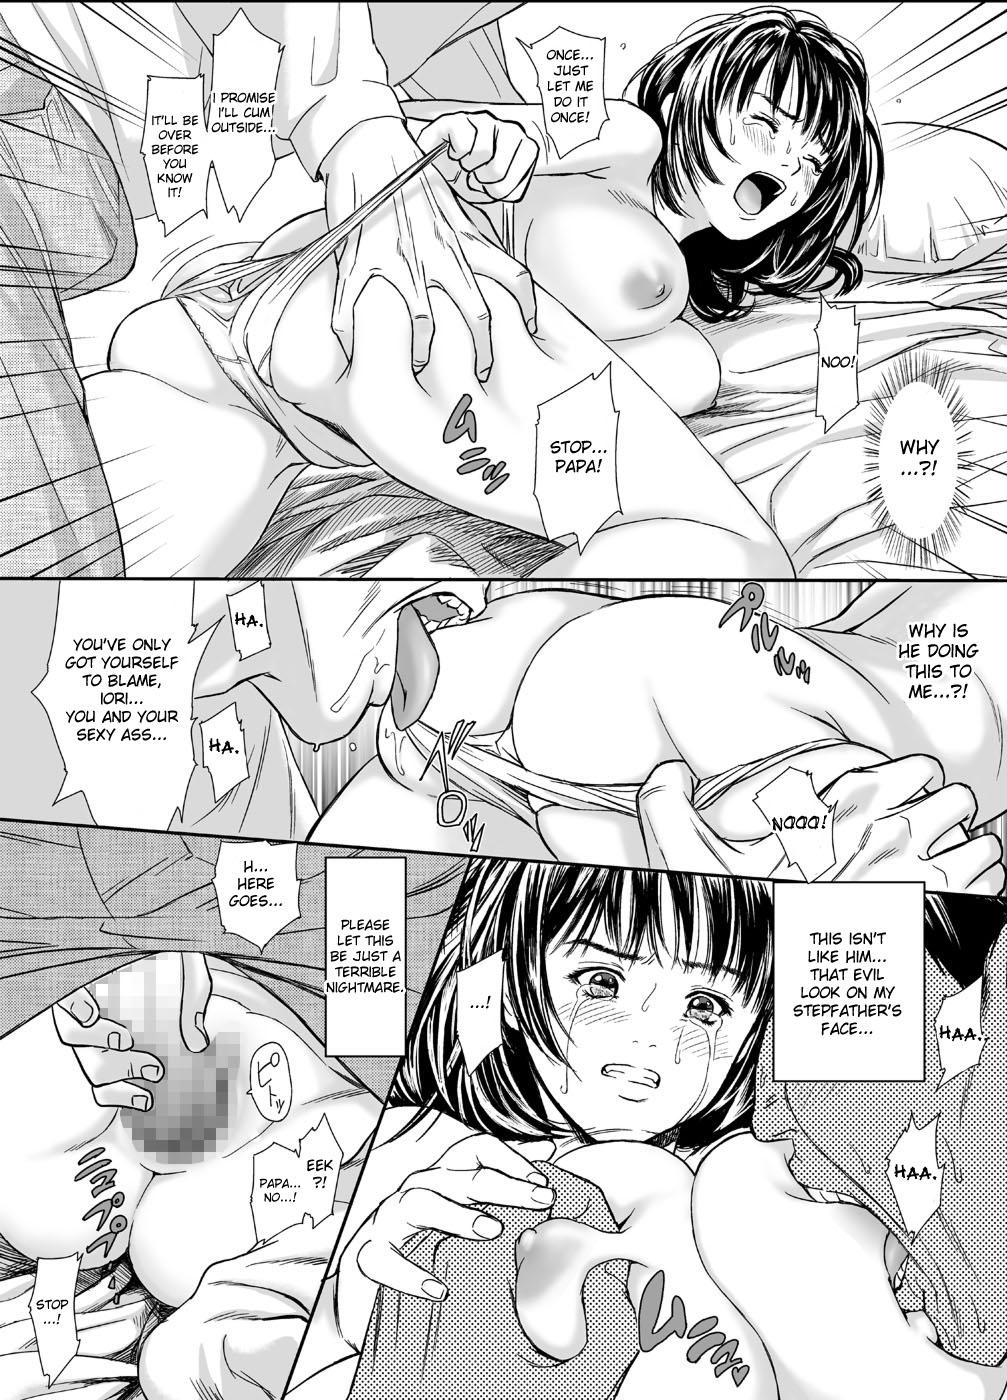 Nice Ass Iori - The Dark Side Of That Girl - Is Amatuer Sex - Page 5